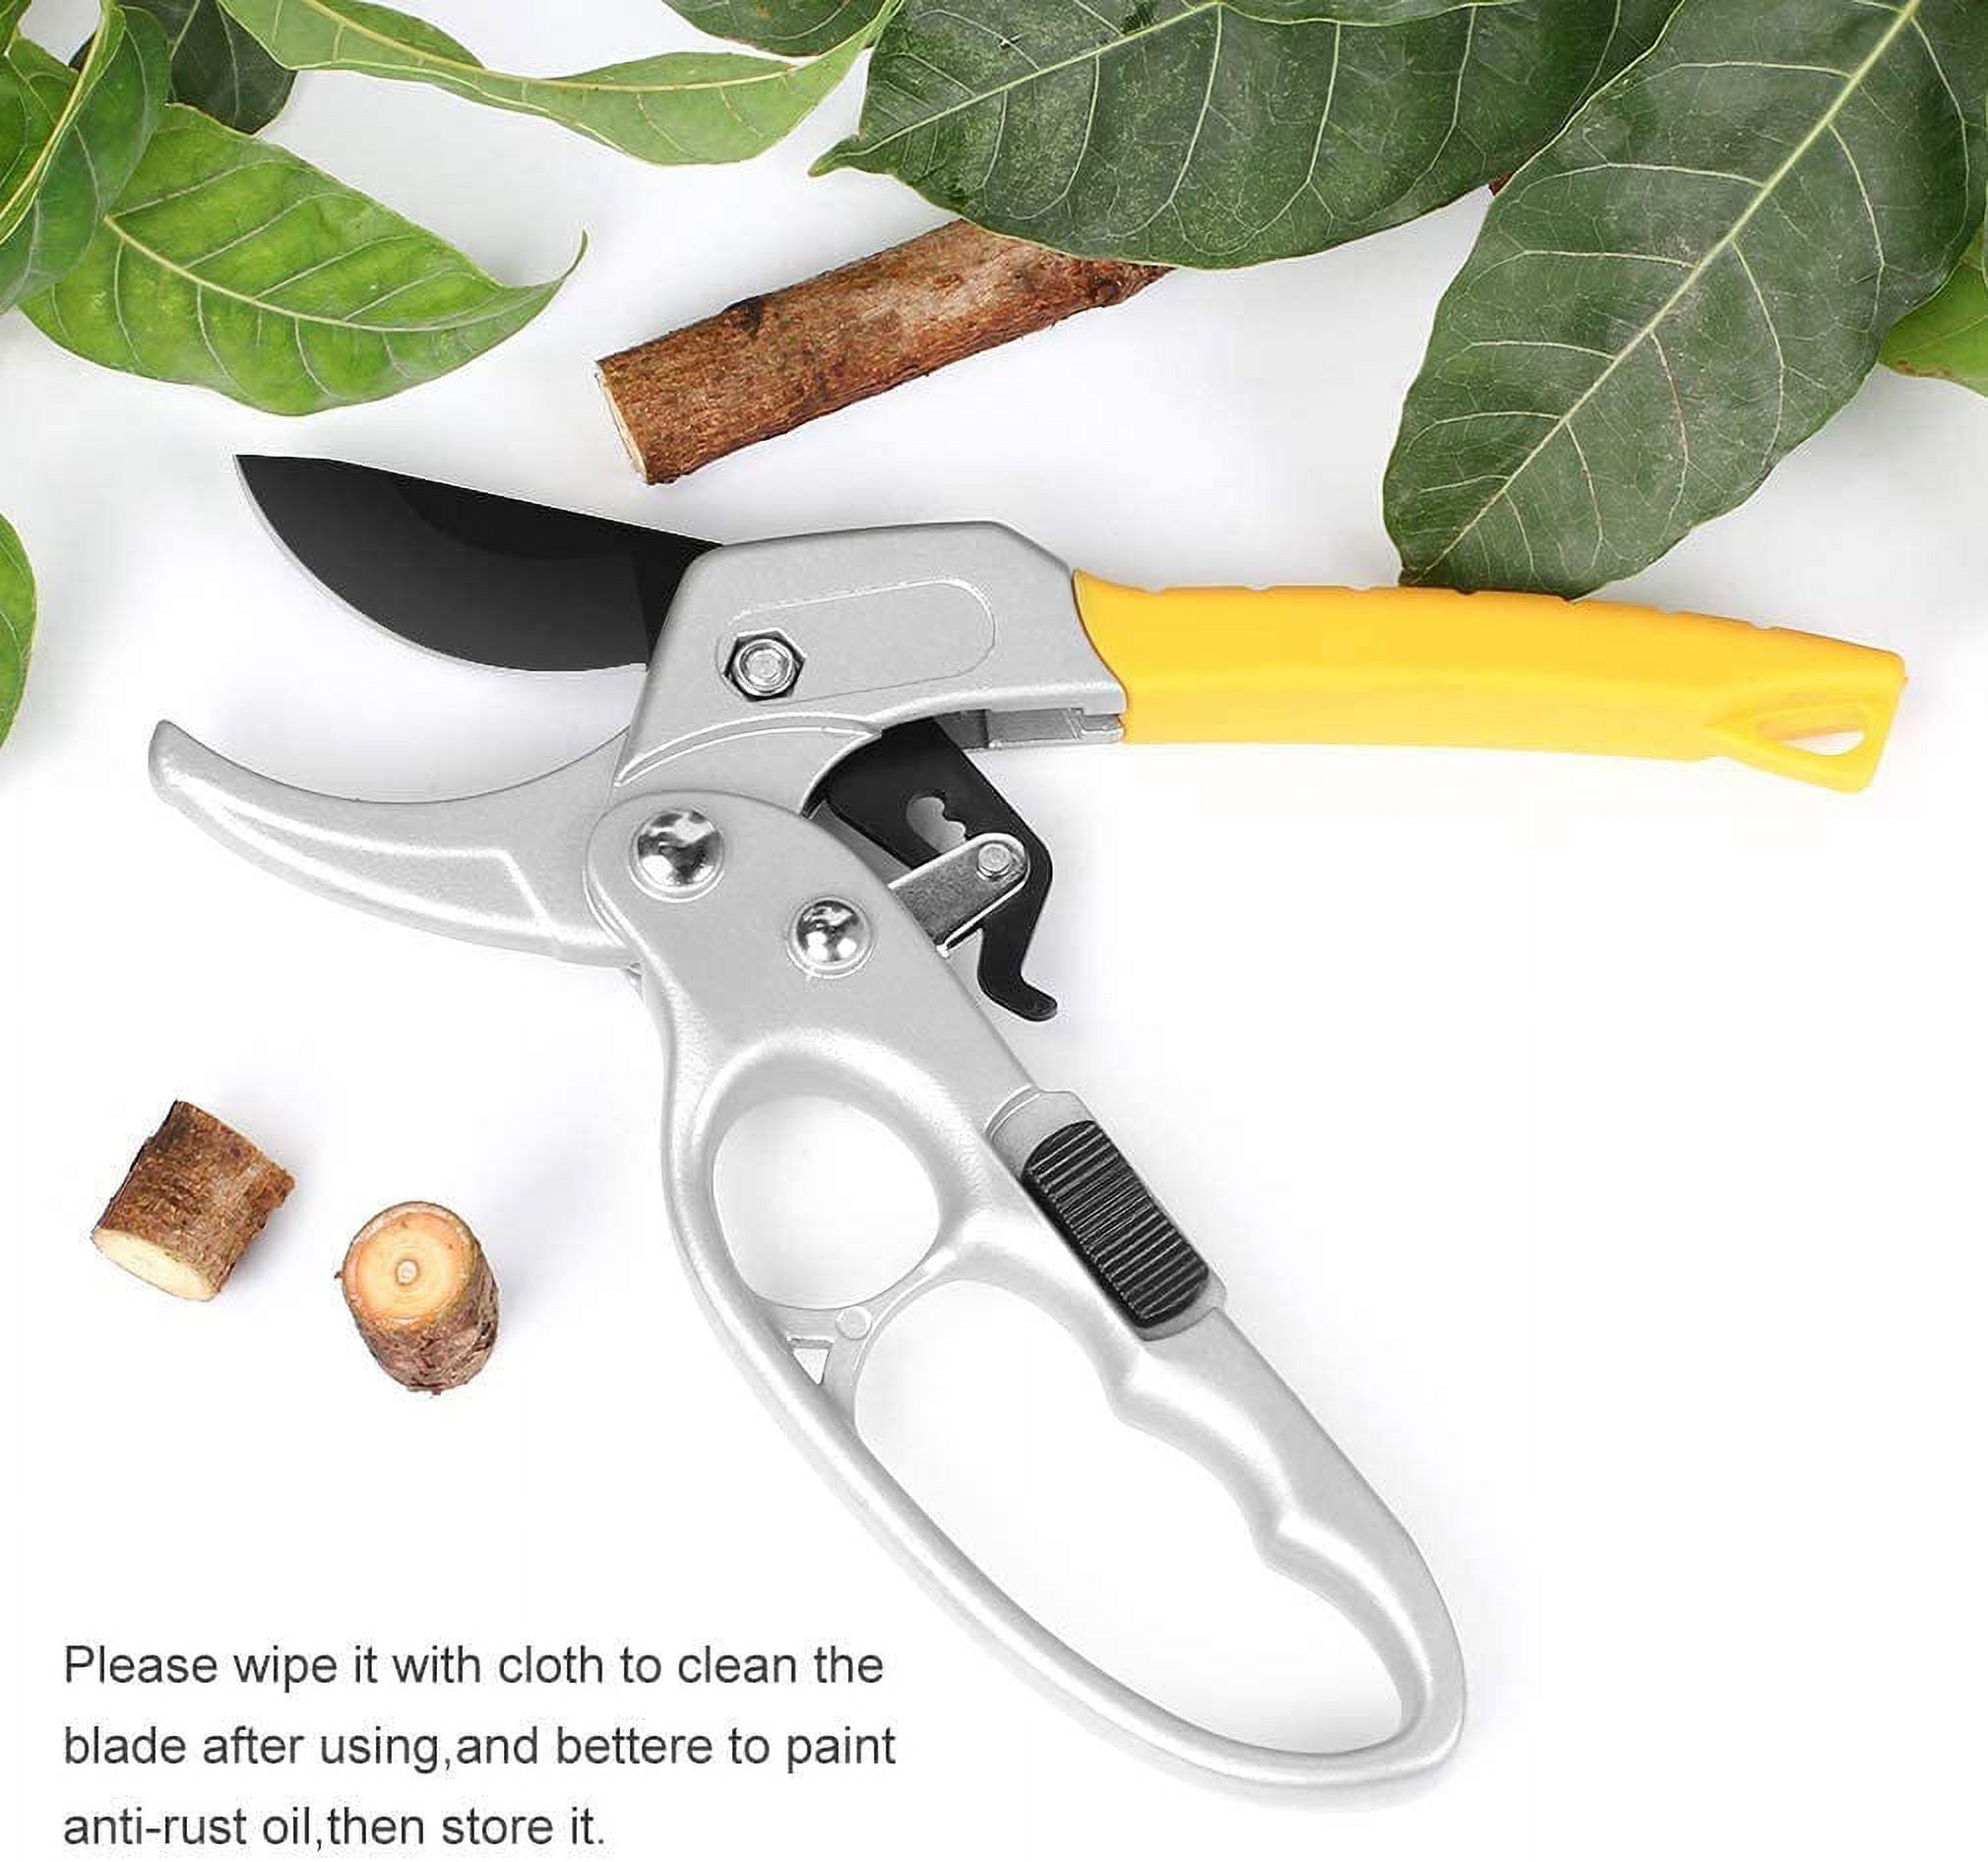 YIYITOOLS Pruning Shears, One-Hand Garden Shears, Gardening Hand Tools Tree  Trimmers with Rubber Handles, Pruning Scissors with Titanium Coated